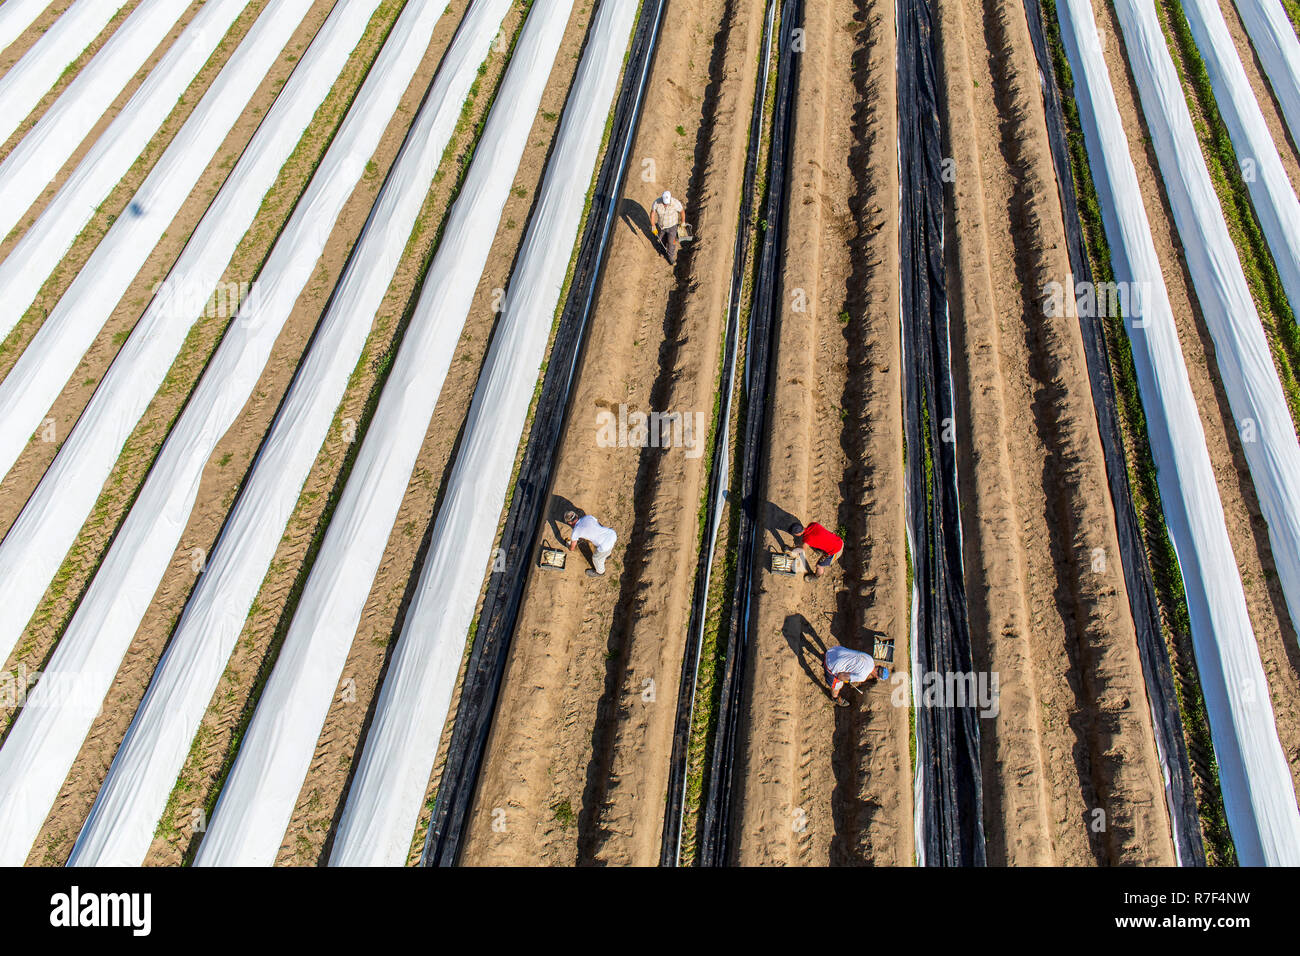 Asparagus harvest, asparagus dams, partly covered with plastic sheets, Walbeck, Niederrhein or Lower Rhine region Stock Photo